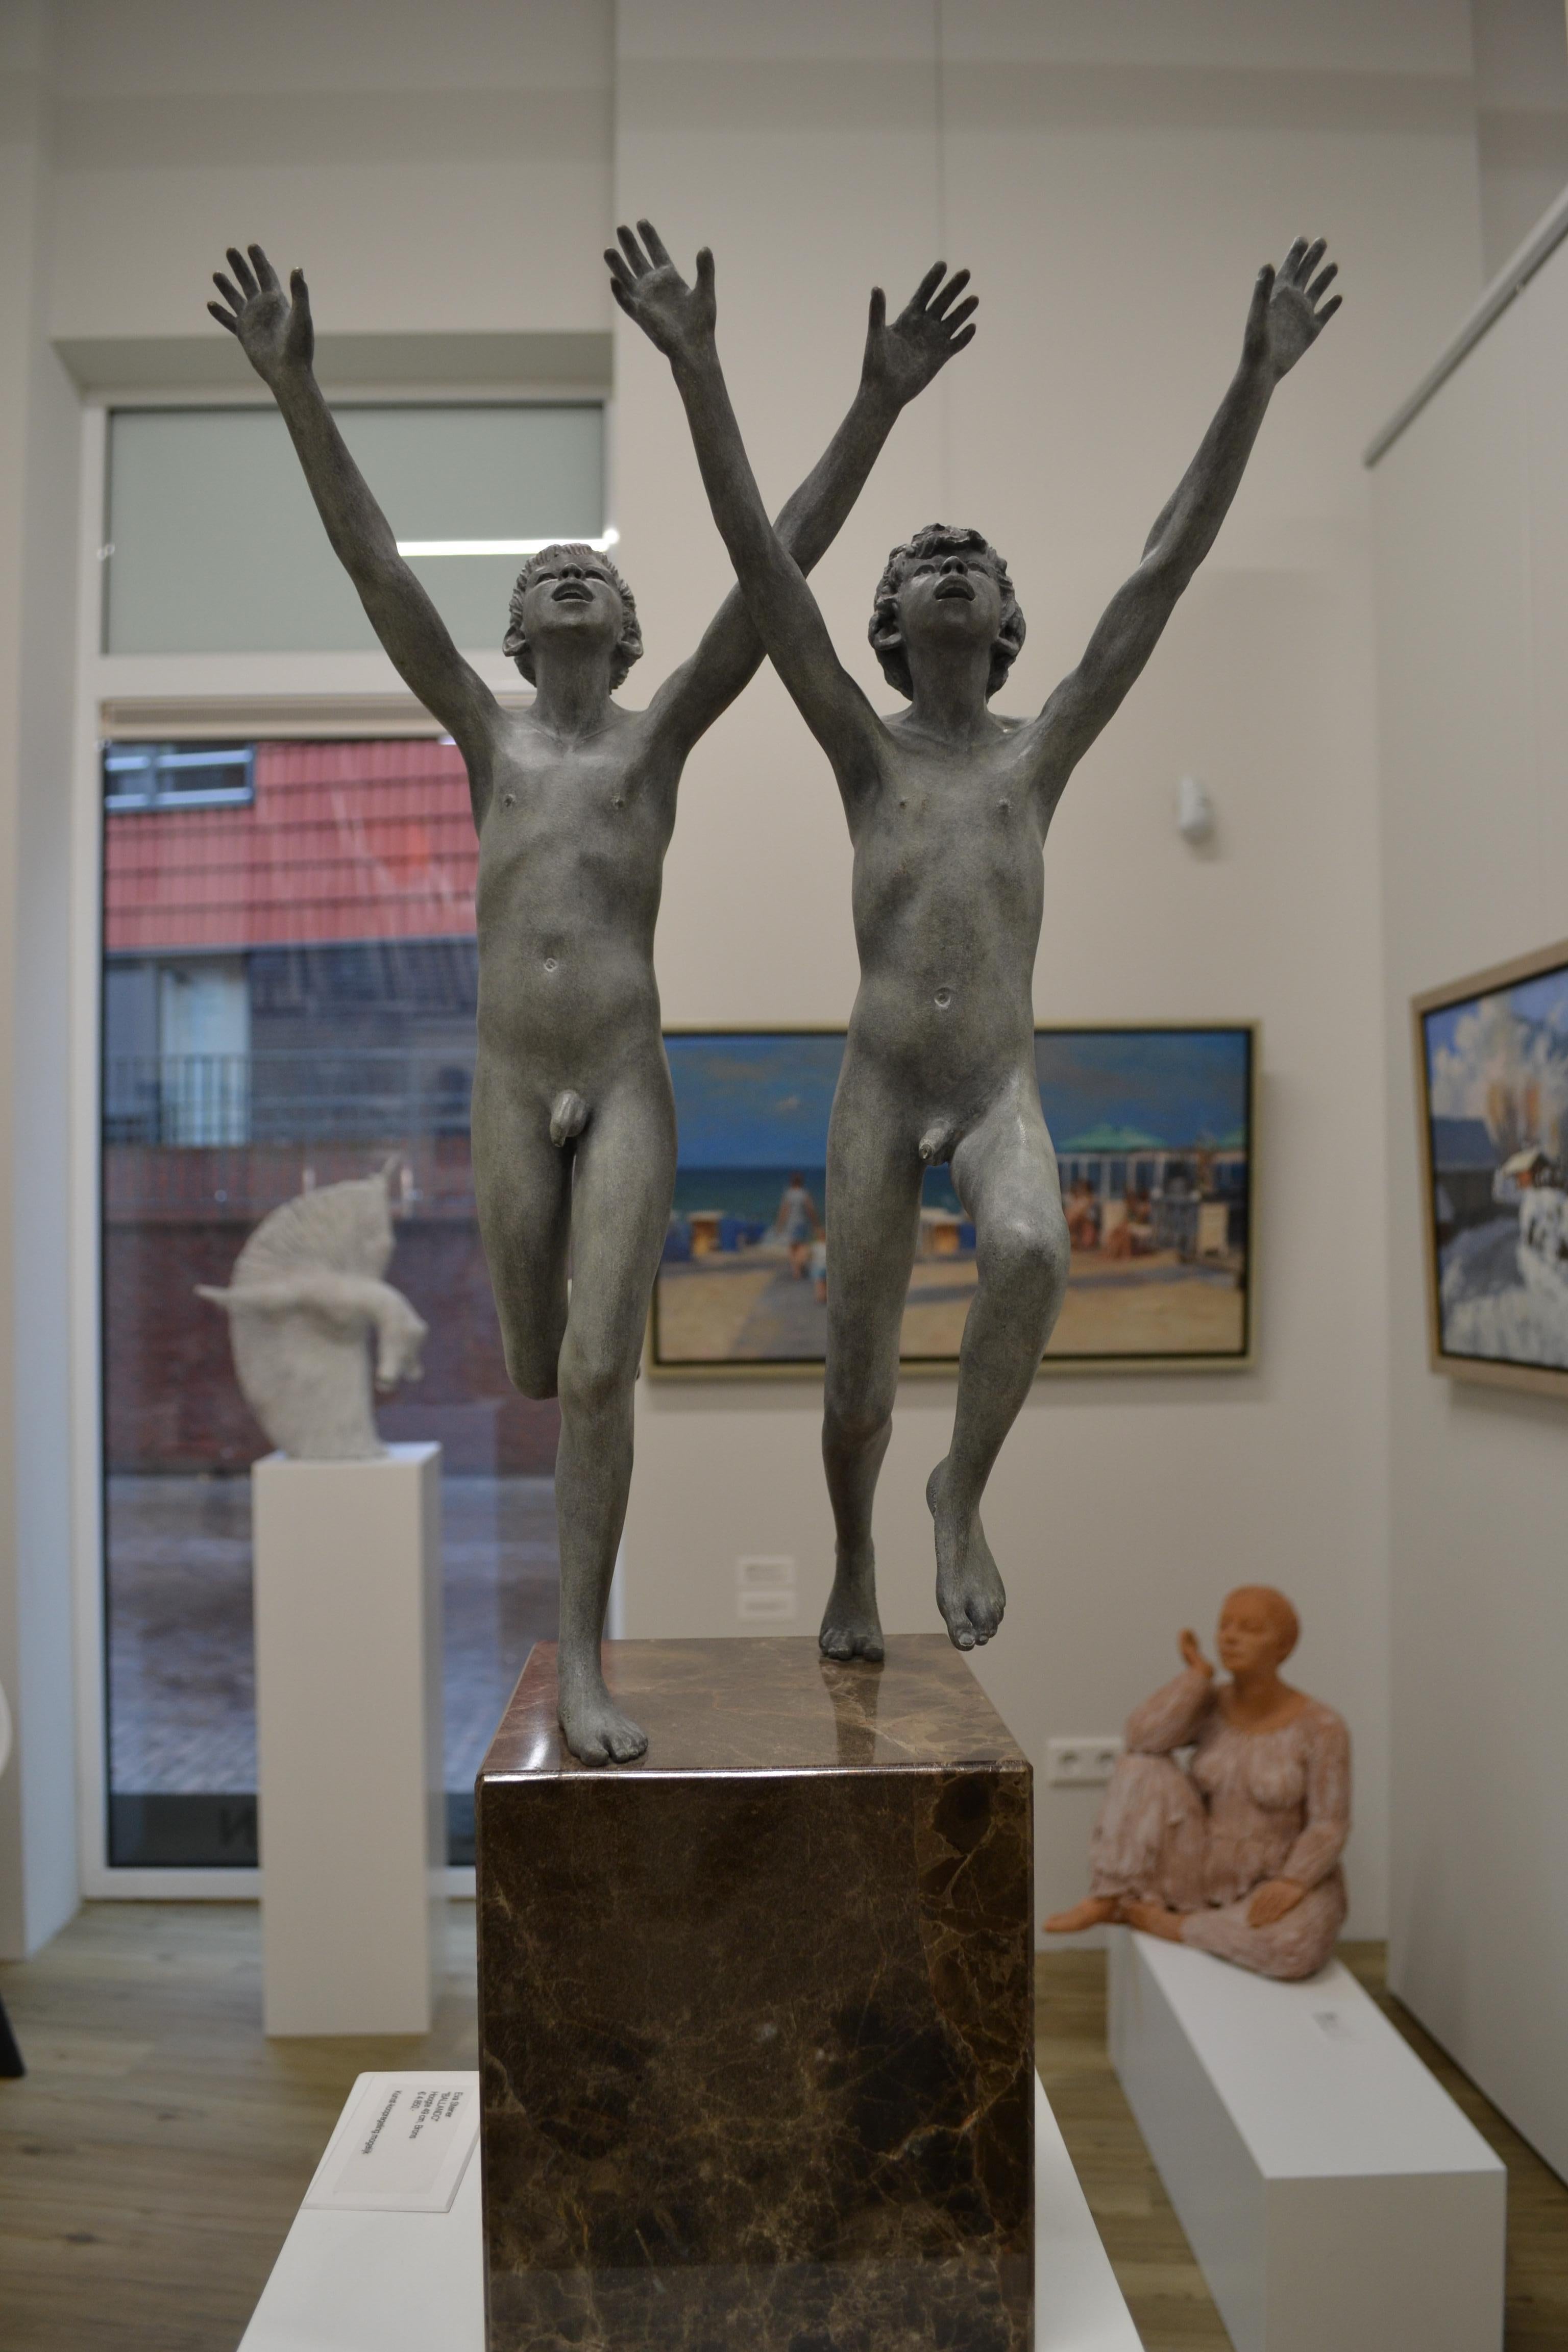 Cursus- 21st Century Contemporary Bronze Sculpture of Two Nude Boys Playing - Gold Figurative Sculpture by Wim van der Kant